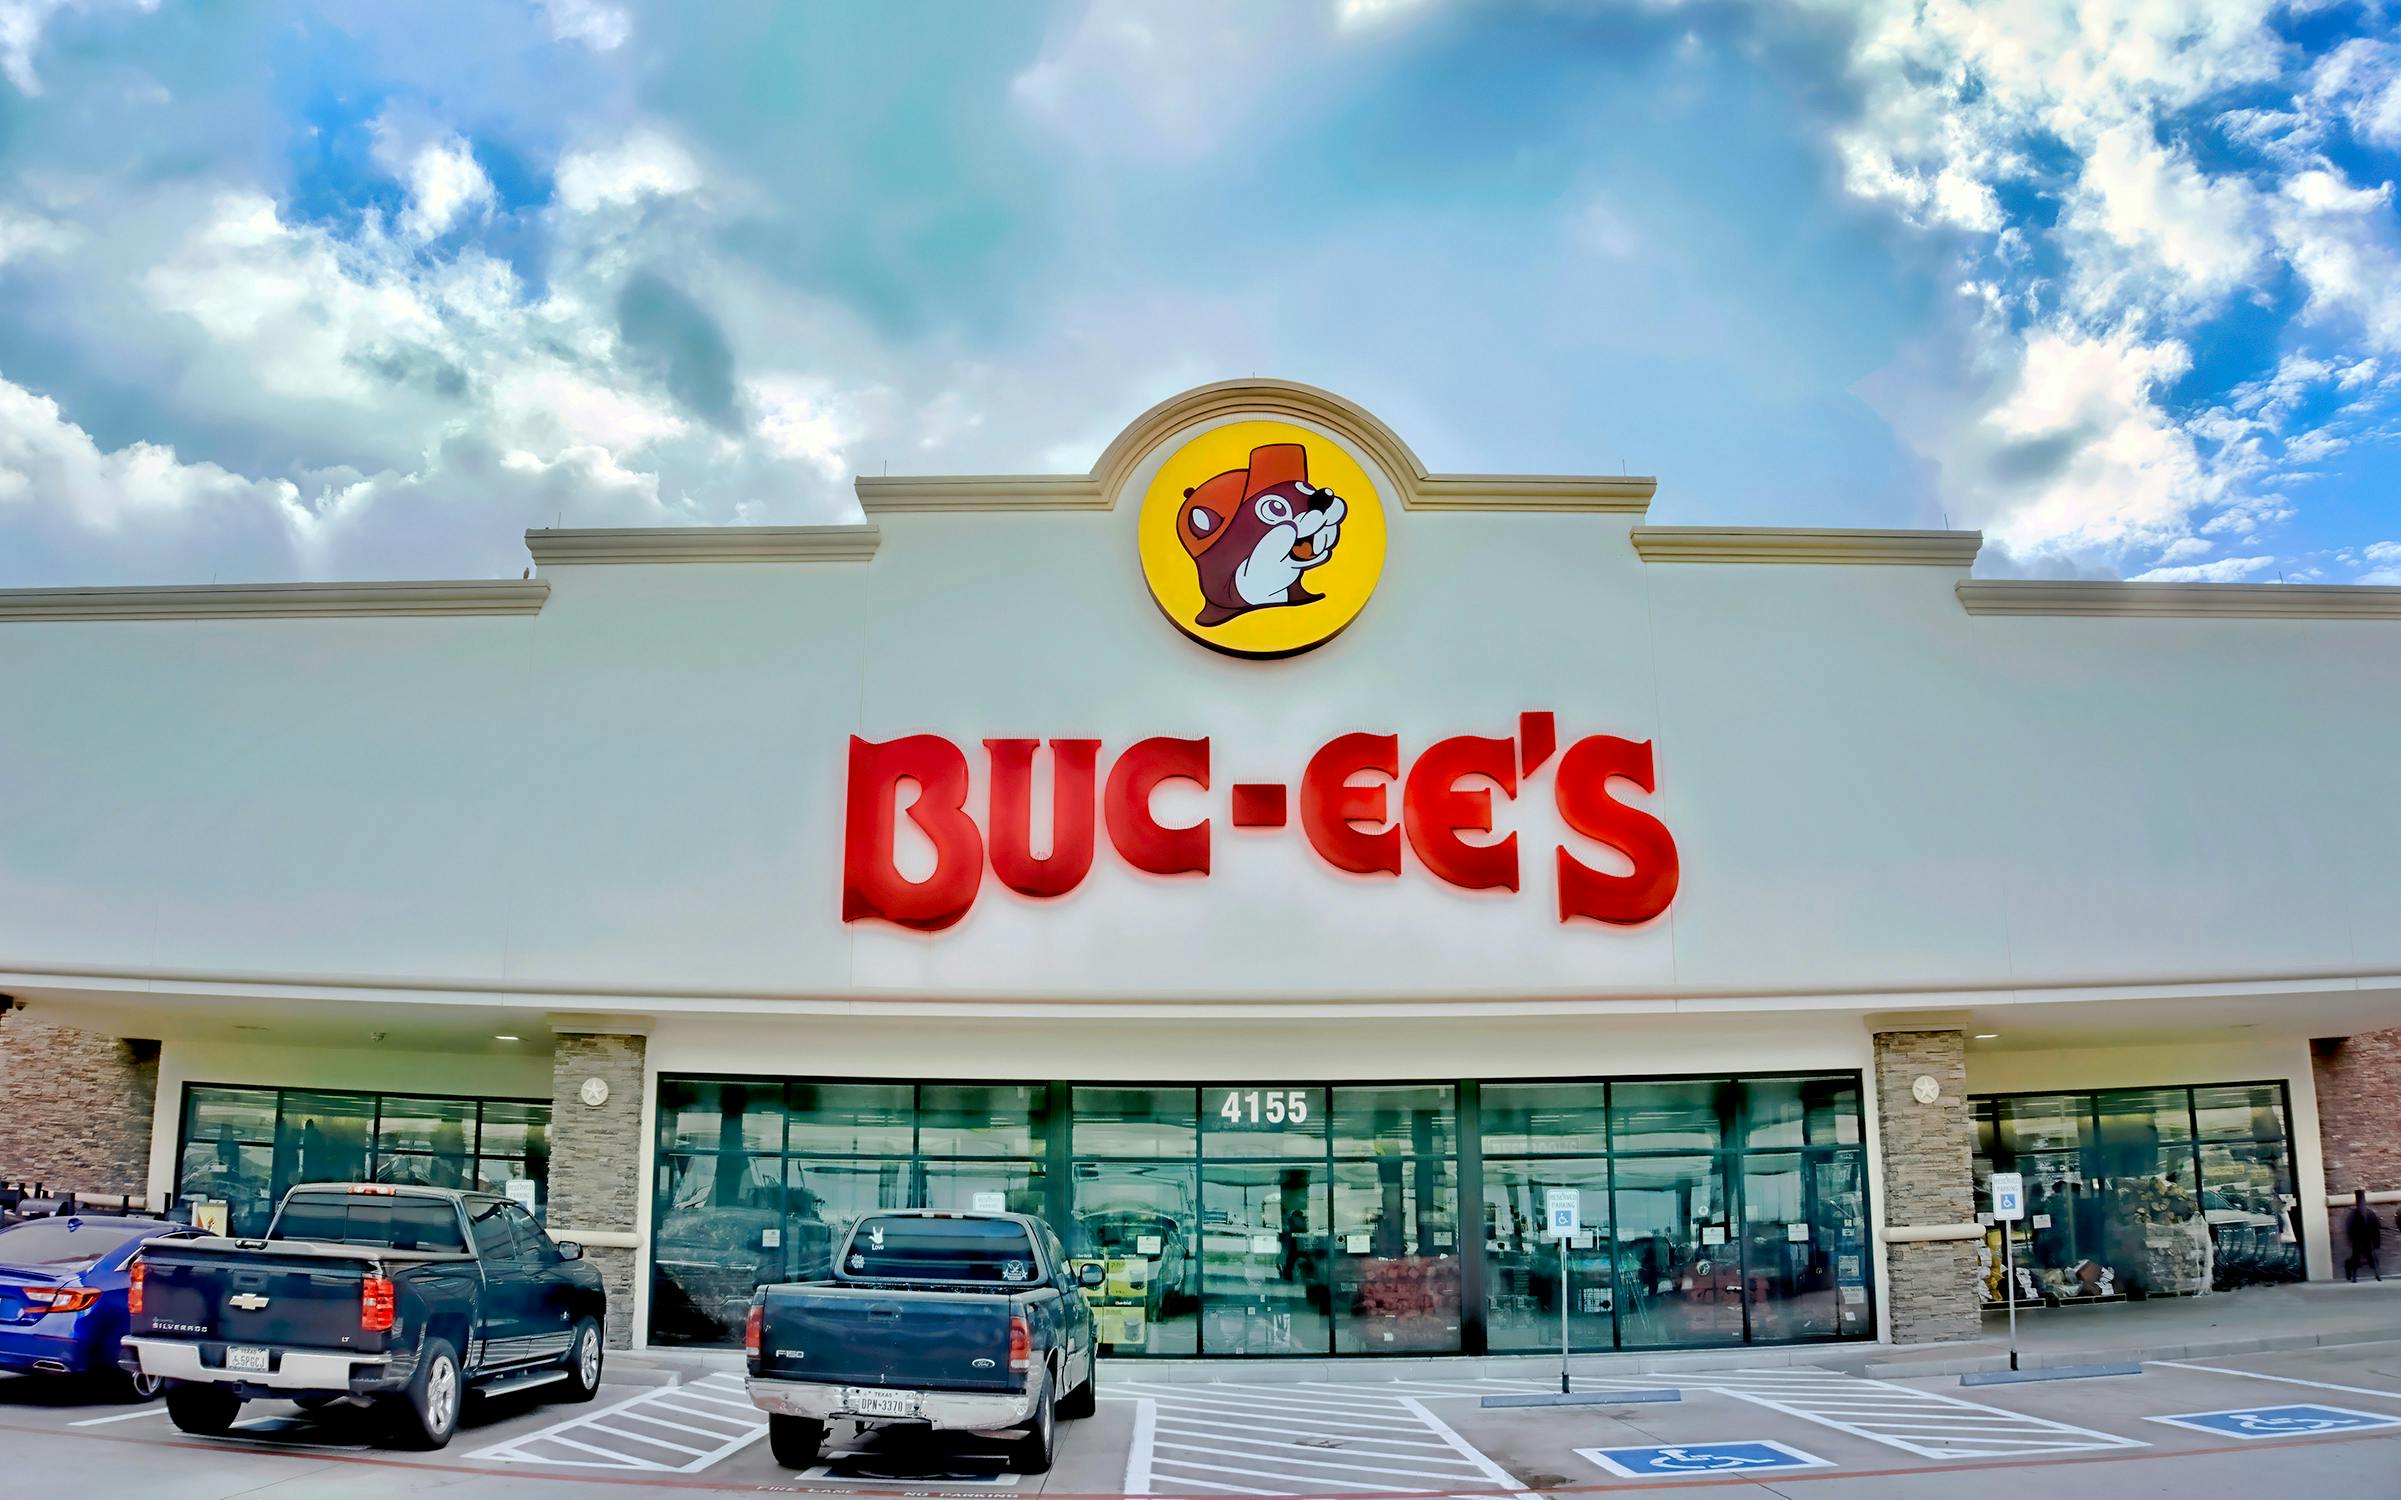 The Buc-ee's Stops Why the Iconic Chain is Facing a Backlash – Texas Monthly